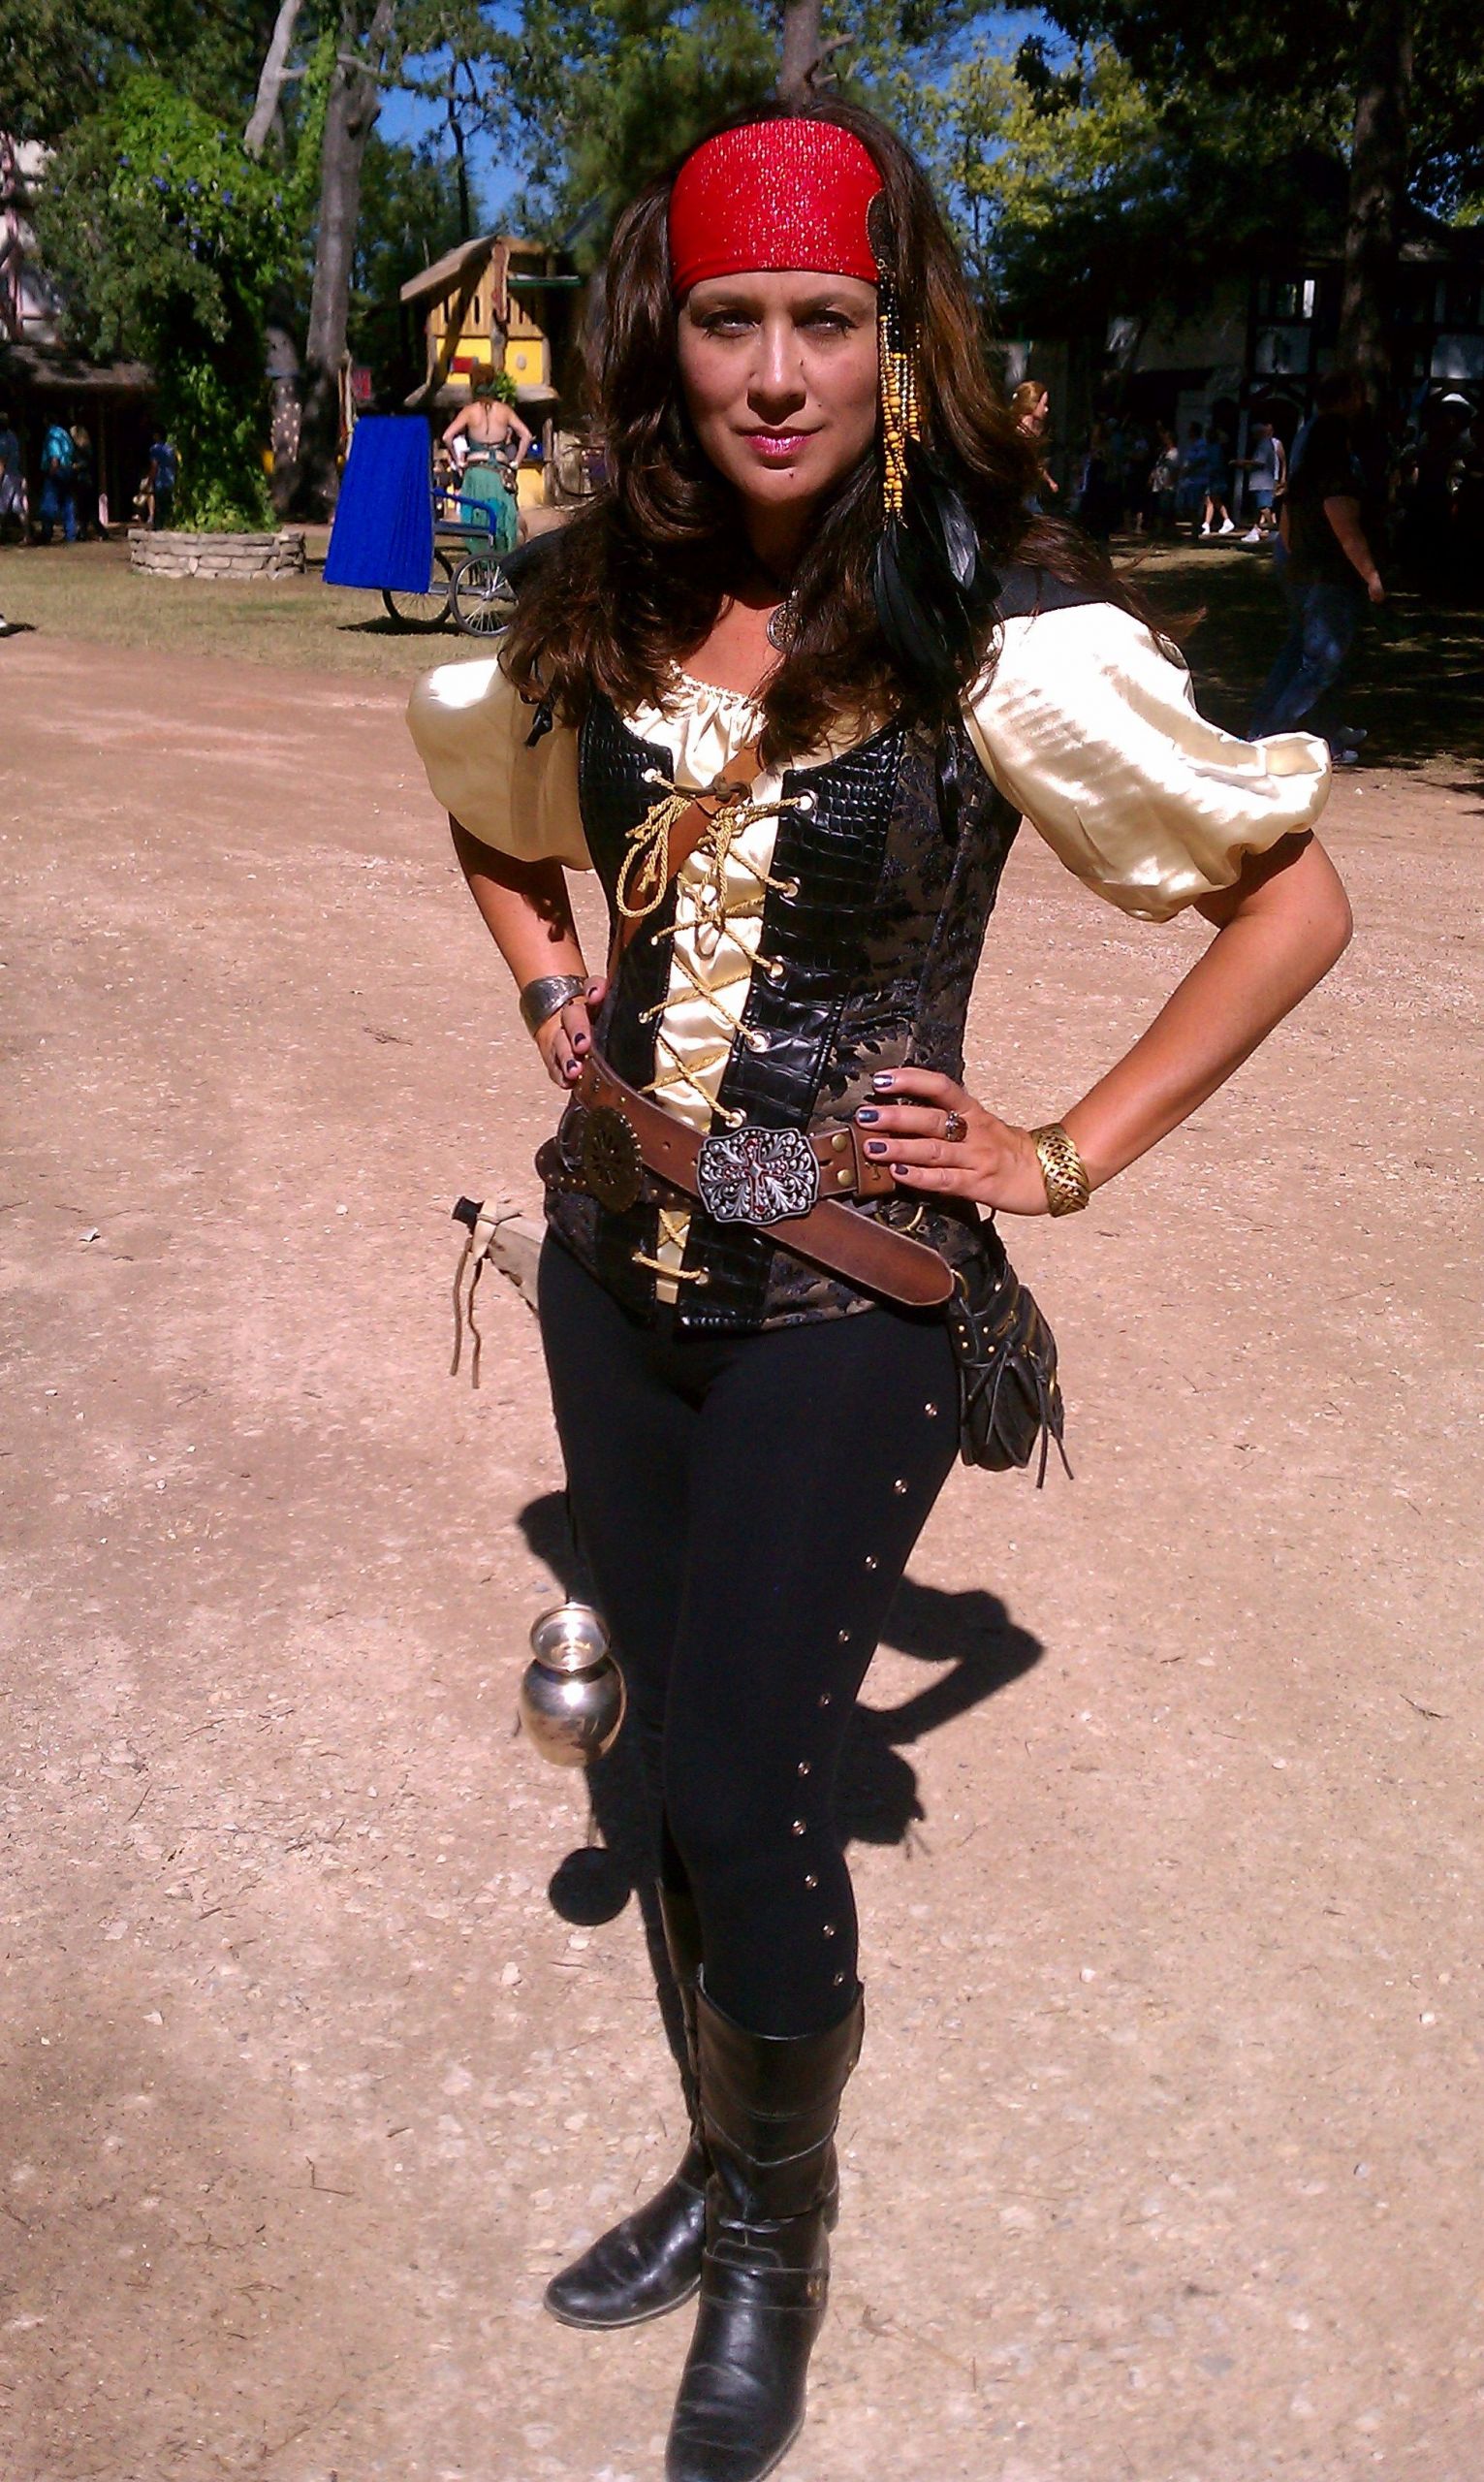 Woman Pirate Costume DIY
 My pirate costume with leggings & a short sleeved chemise